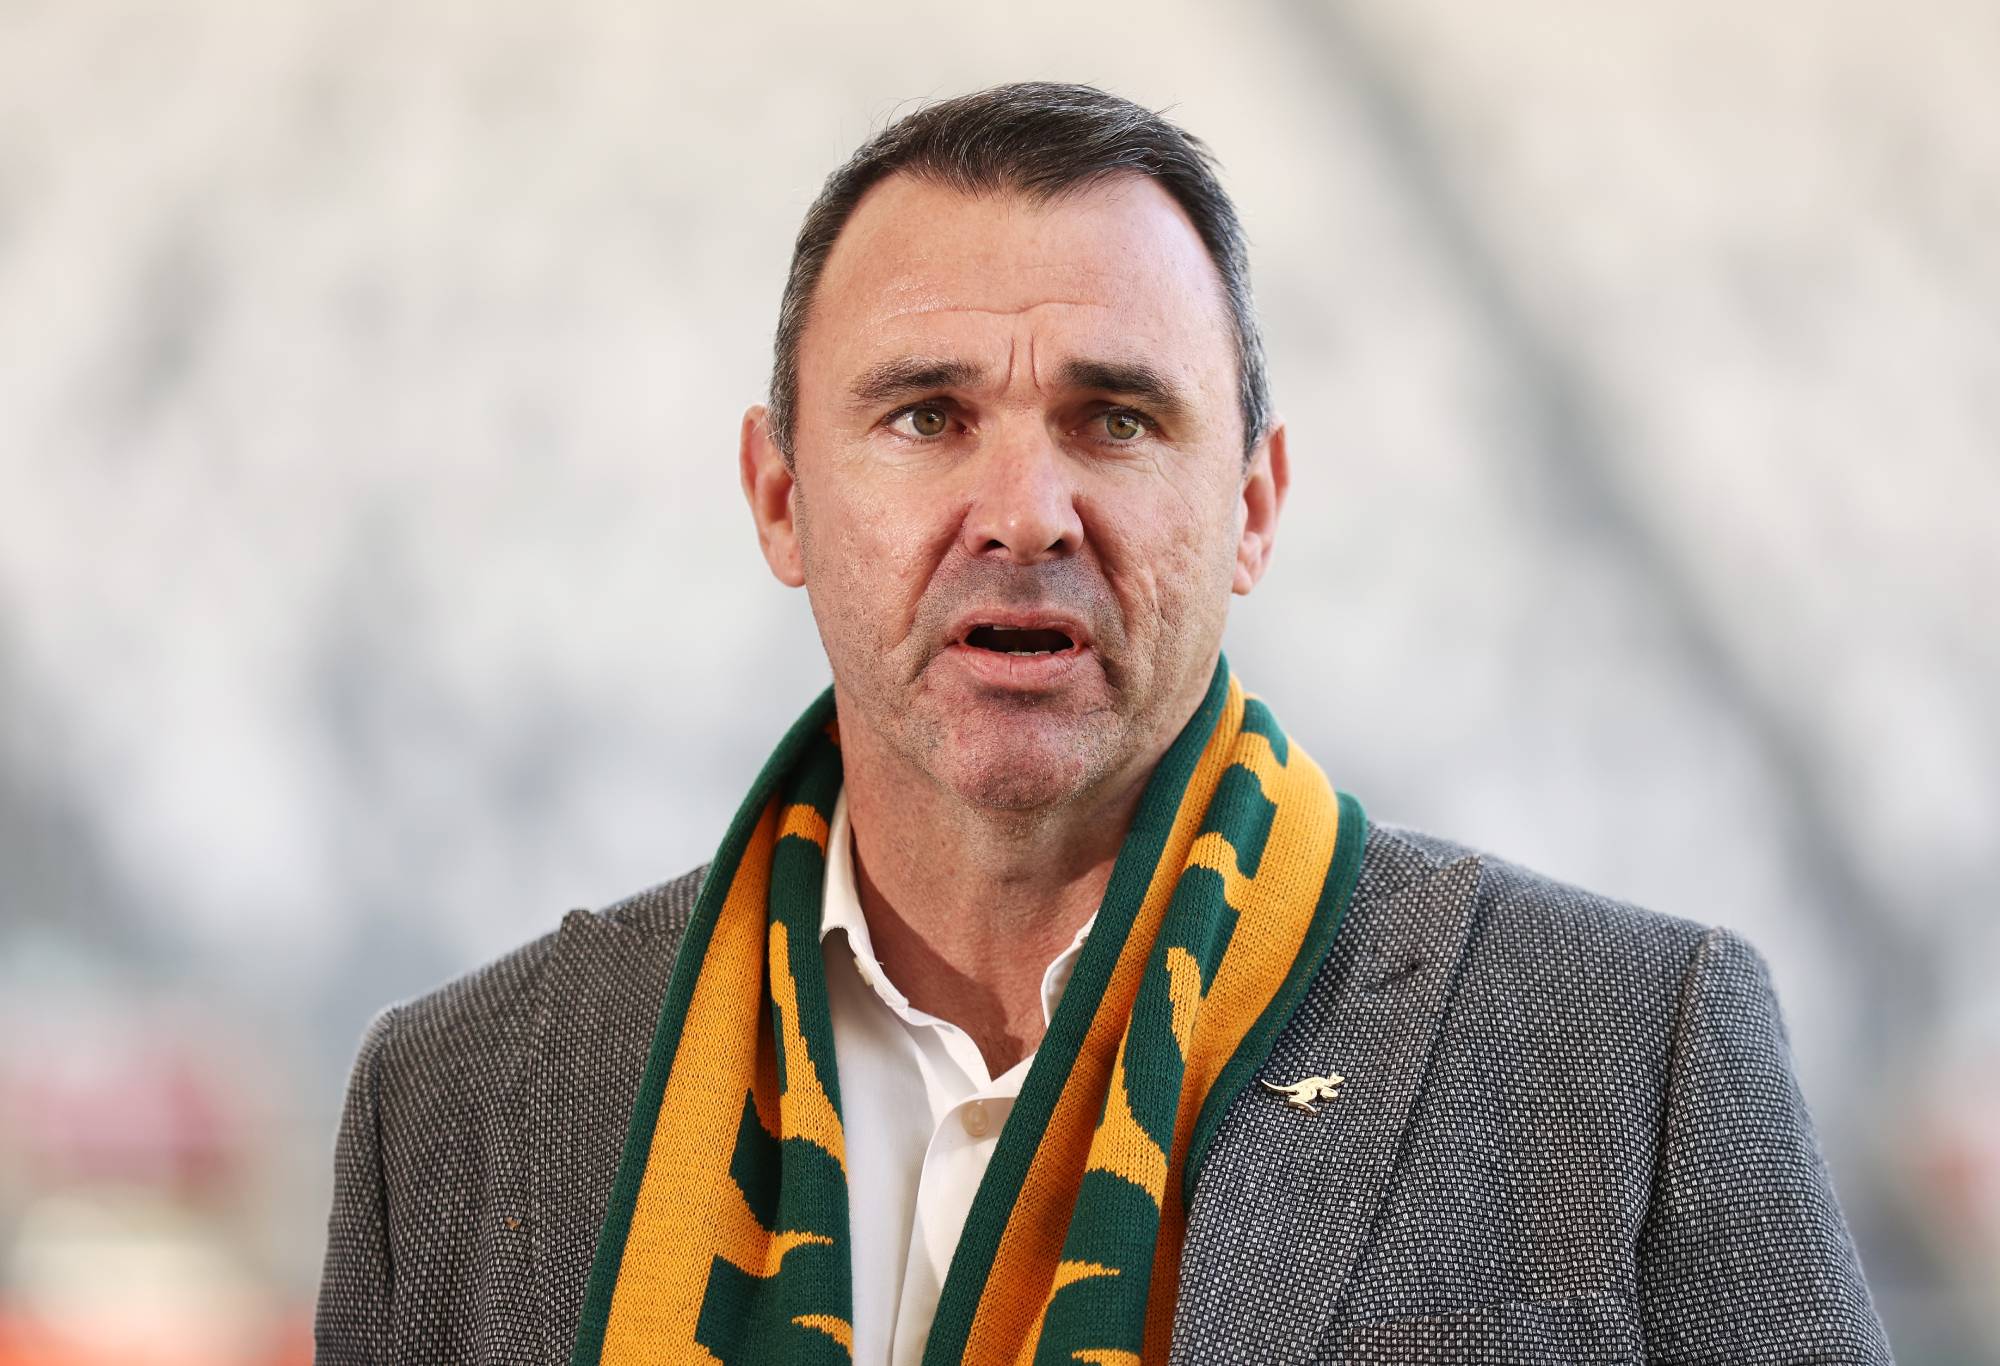 Rugby Australia President Joe Roff speaks to the media during a Wallabies media opportunity at CommBank Stadium on May 10, 2023 in Sydney, Australia. (Photo by Matt King/Getty Images for Rugby Australia)